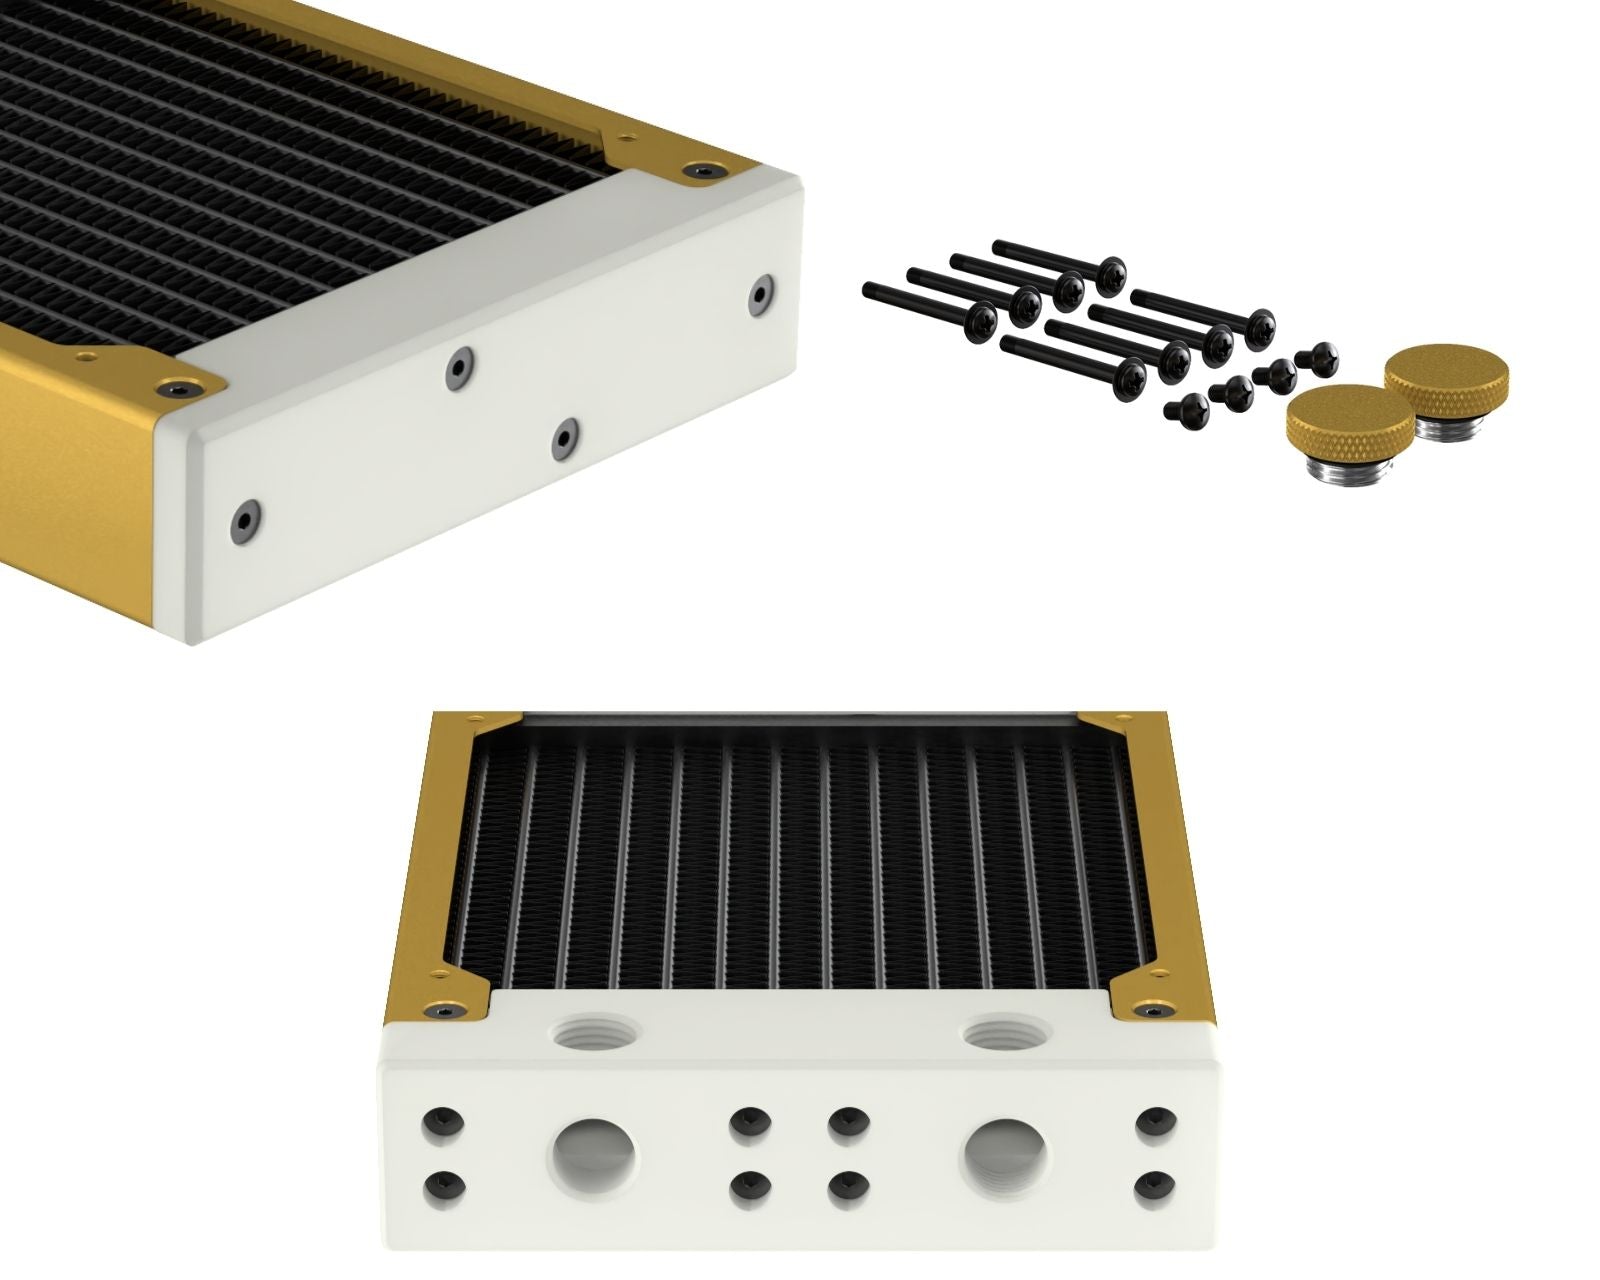 PrimoChill 240SL (30mm) EXIMO Modular Radiator, White POM, 2x120mm, Dual Fan (R-SL-W24) Available in 20+ Colors, Assembled in USA and Custom Watercooling Loop Ready - Gold